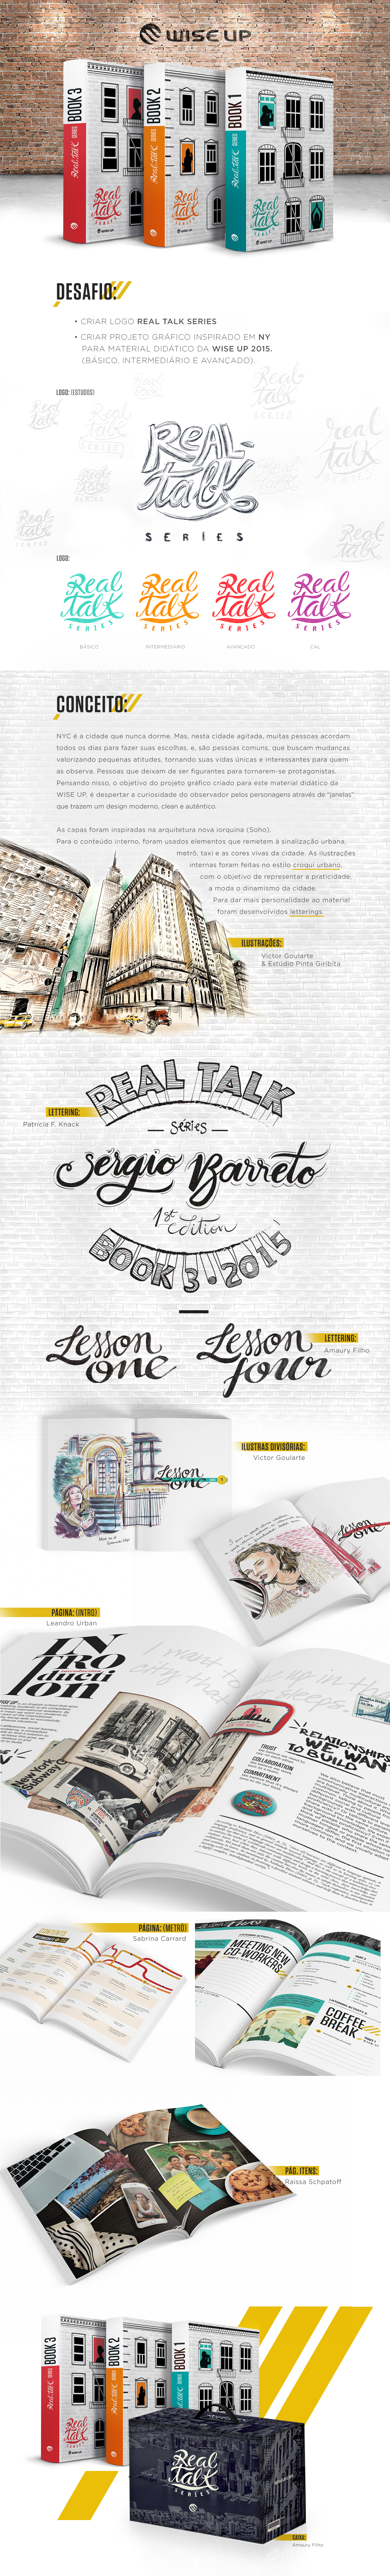 wise up lettering projeto gráfico design gráfico type conceito NY